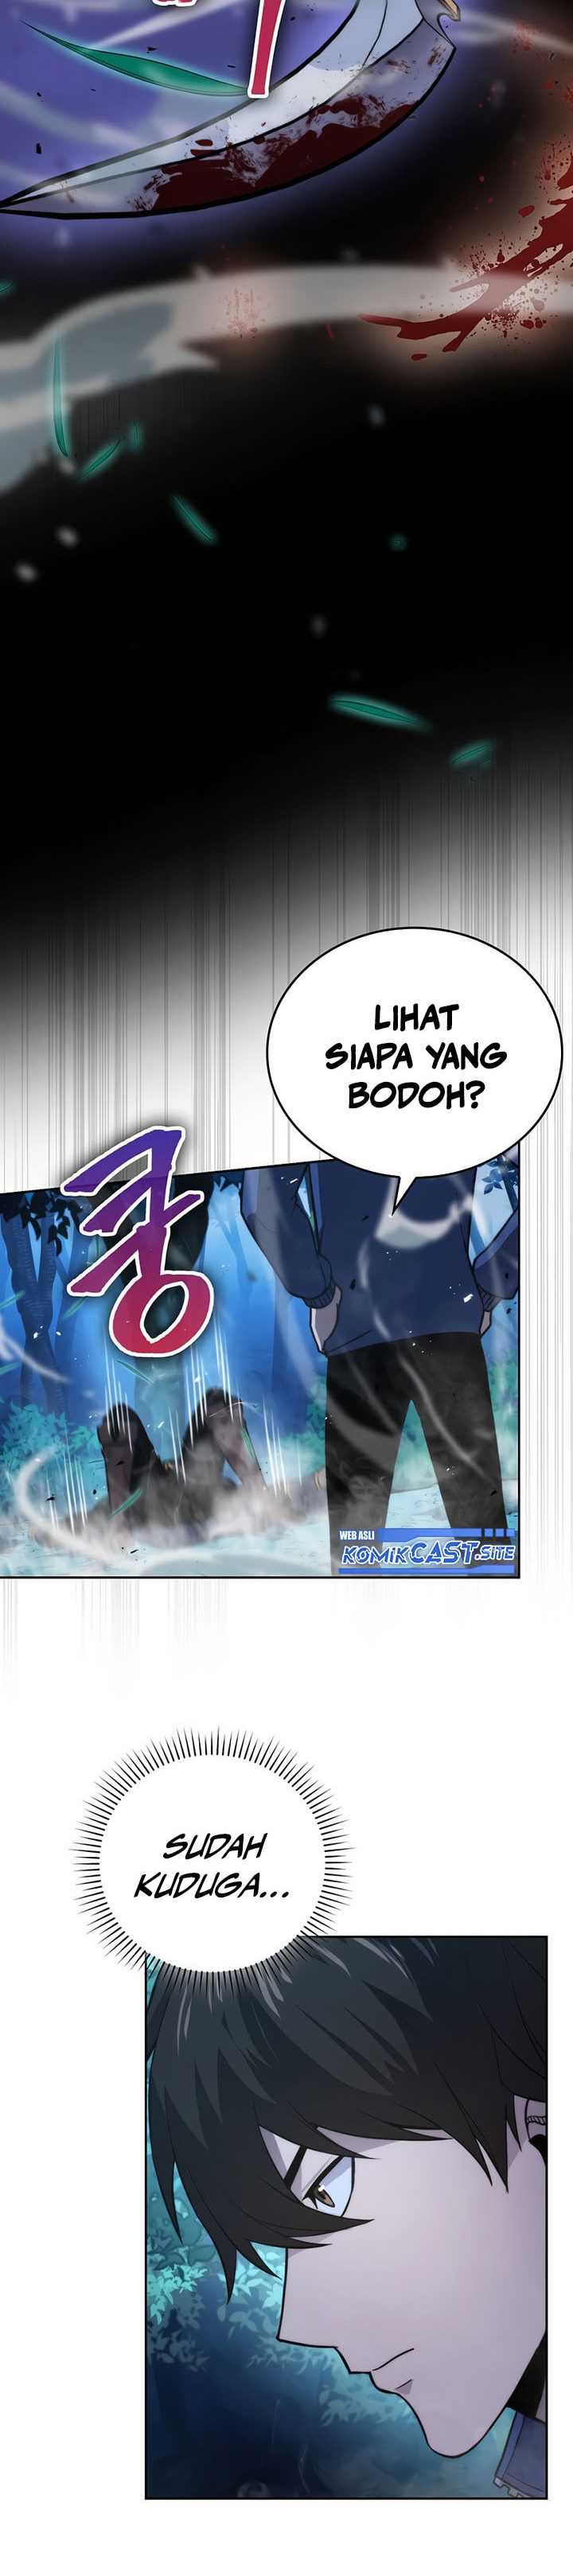 Demon Lord’s Martial Arts Ascension Chapter 29